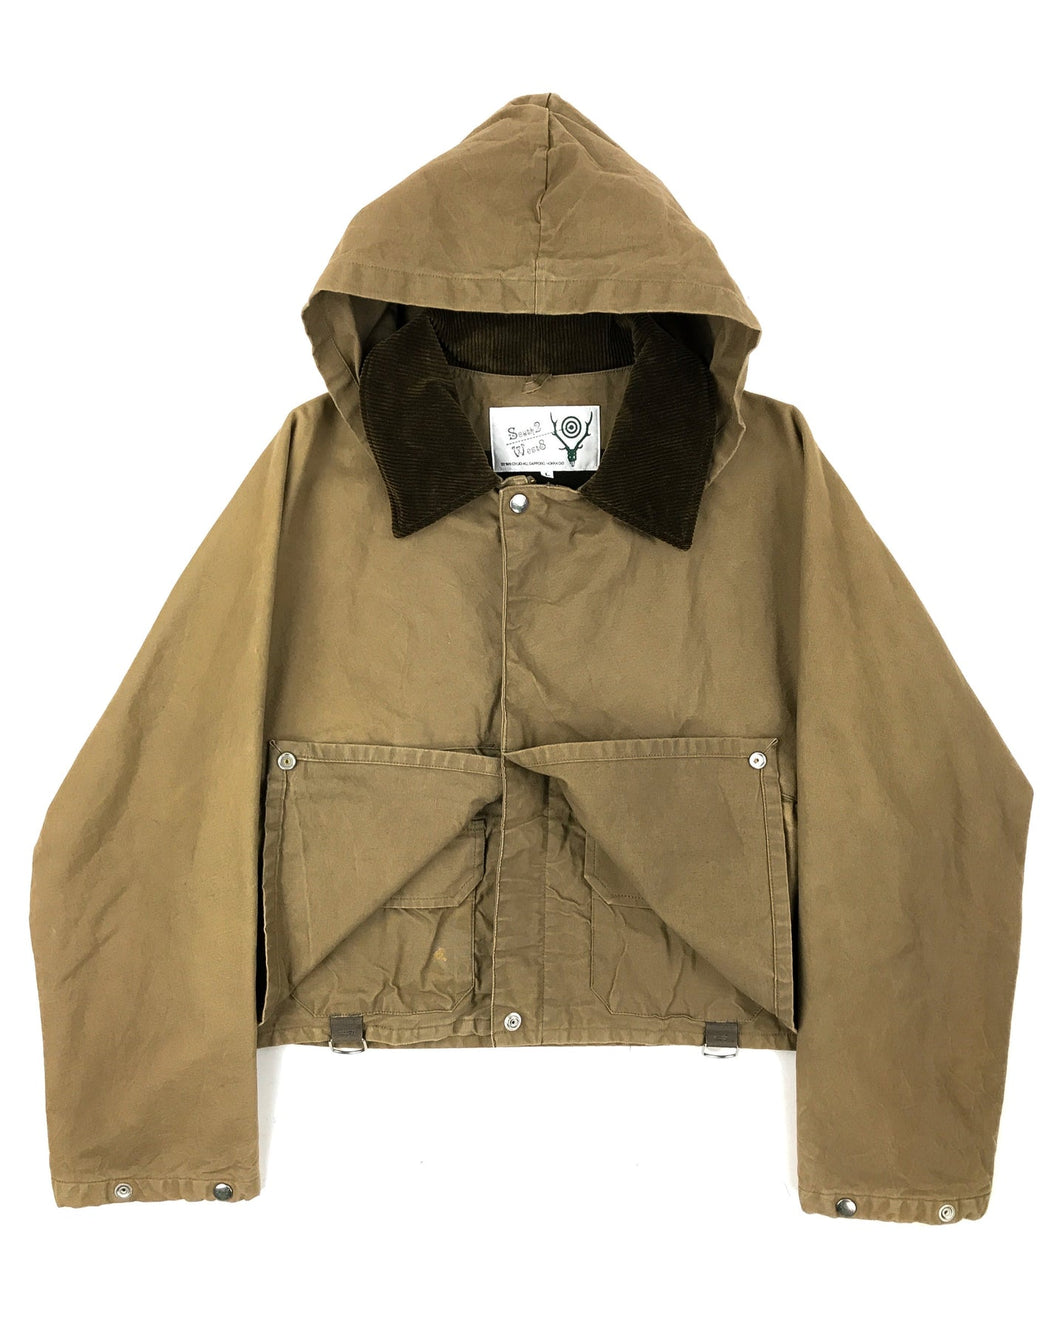 SOUTH2WEST8 Cropped Fly Fishing Jacket (S-L)